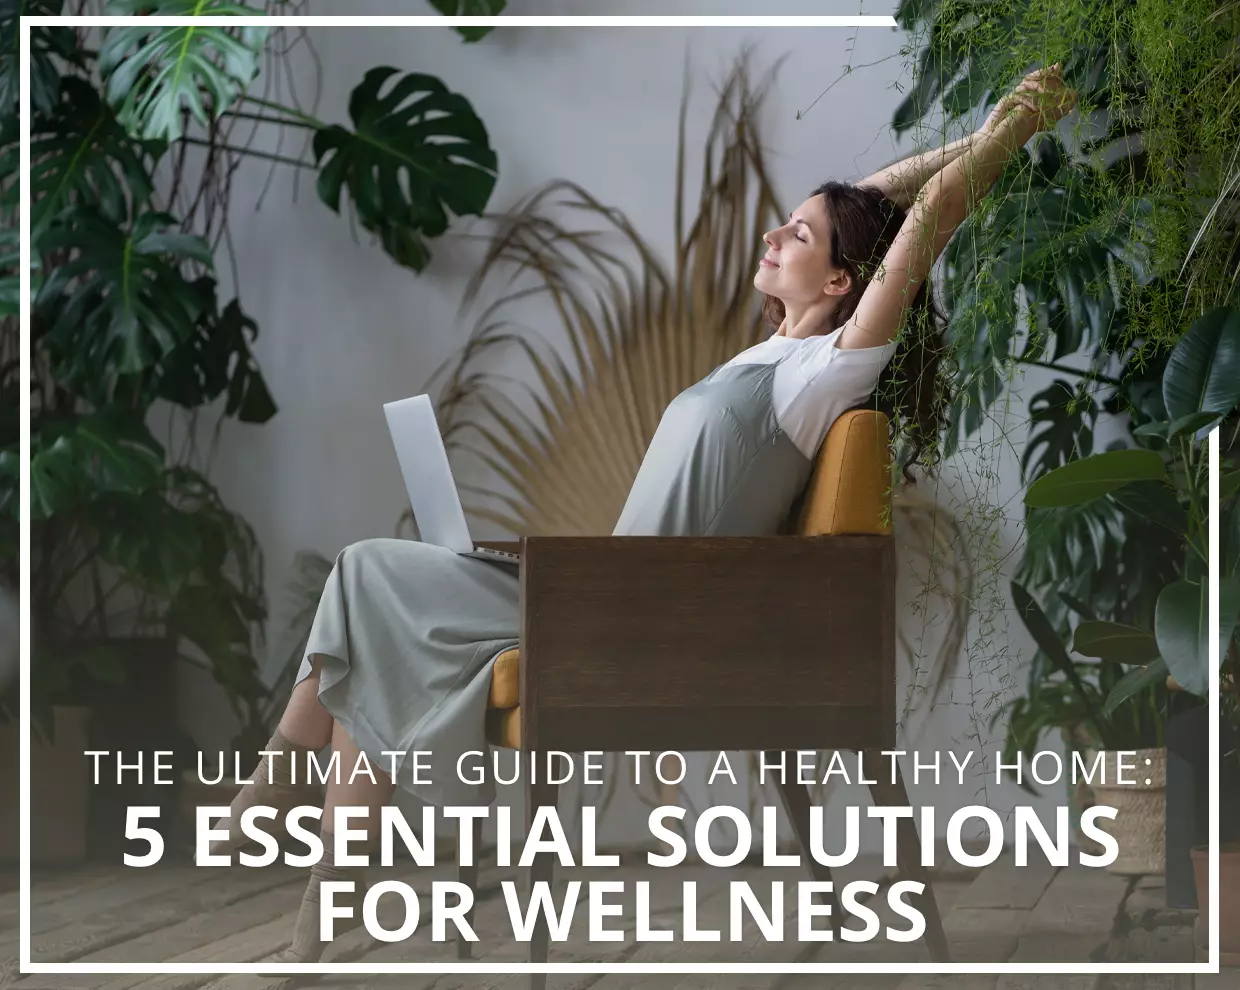 The Ultimate Guide to a Healthy Home: 5 Essential Solutions for Wellness 